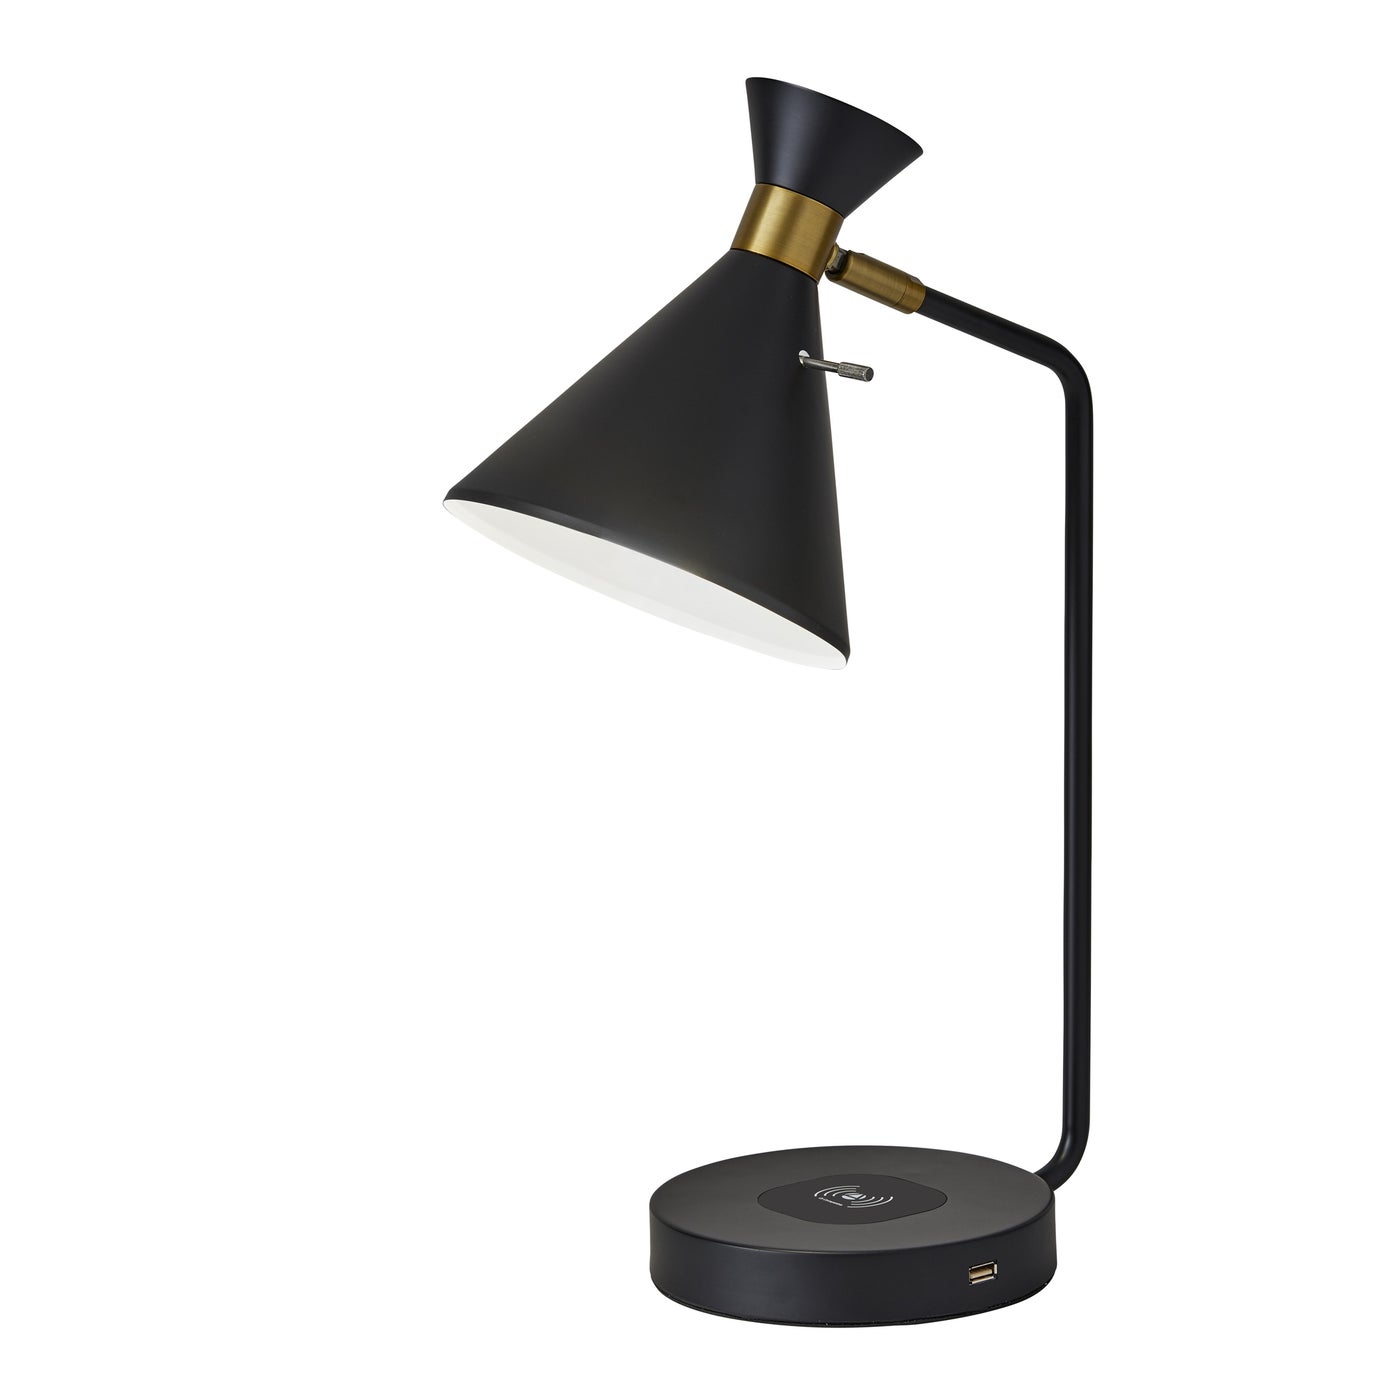 smøre Mose Institut Maxine AdessoCharge Desk Lamp - adesso charge | Adesso